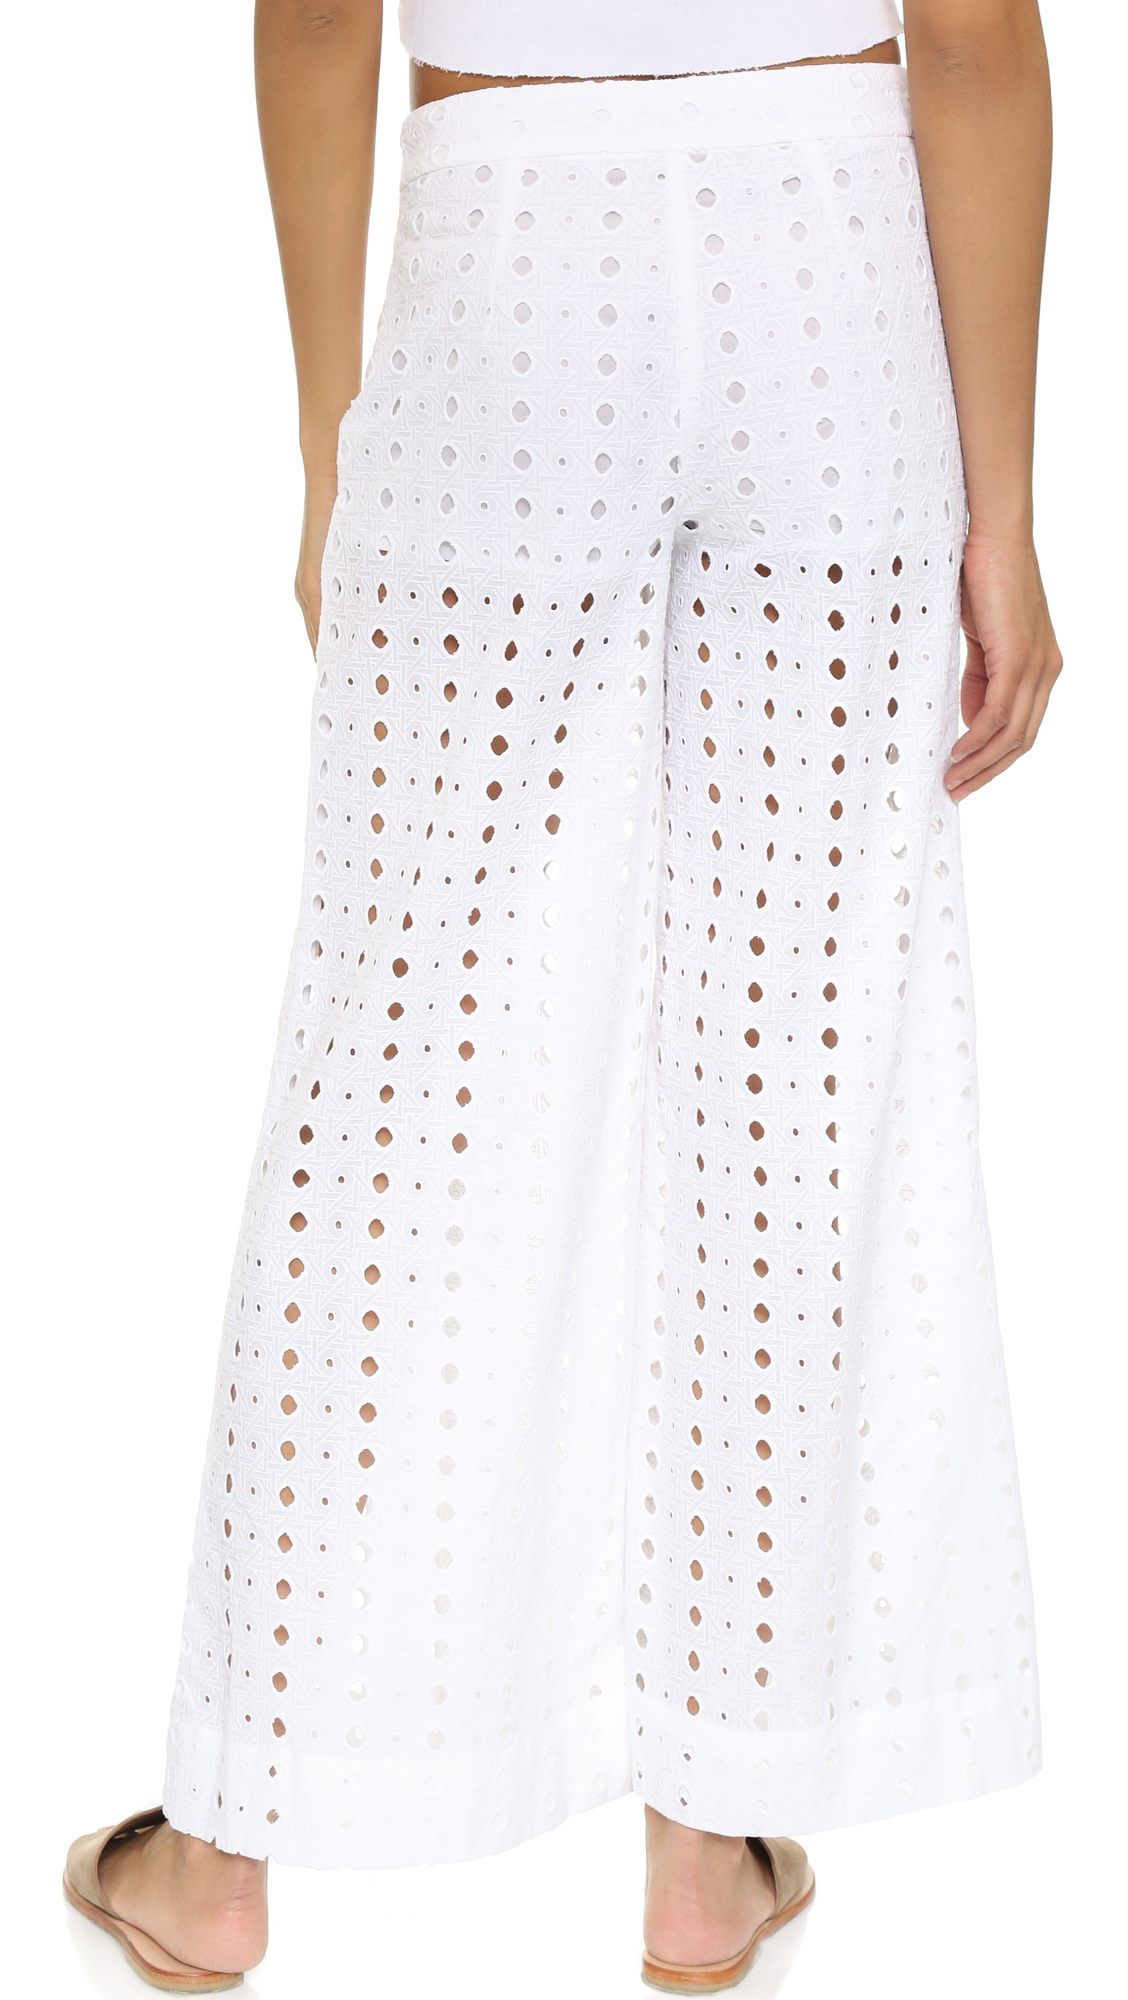 Free People Cotton Helena Eyelet Pants in White - Lyst